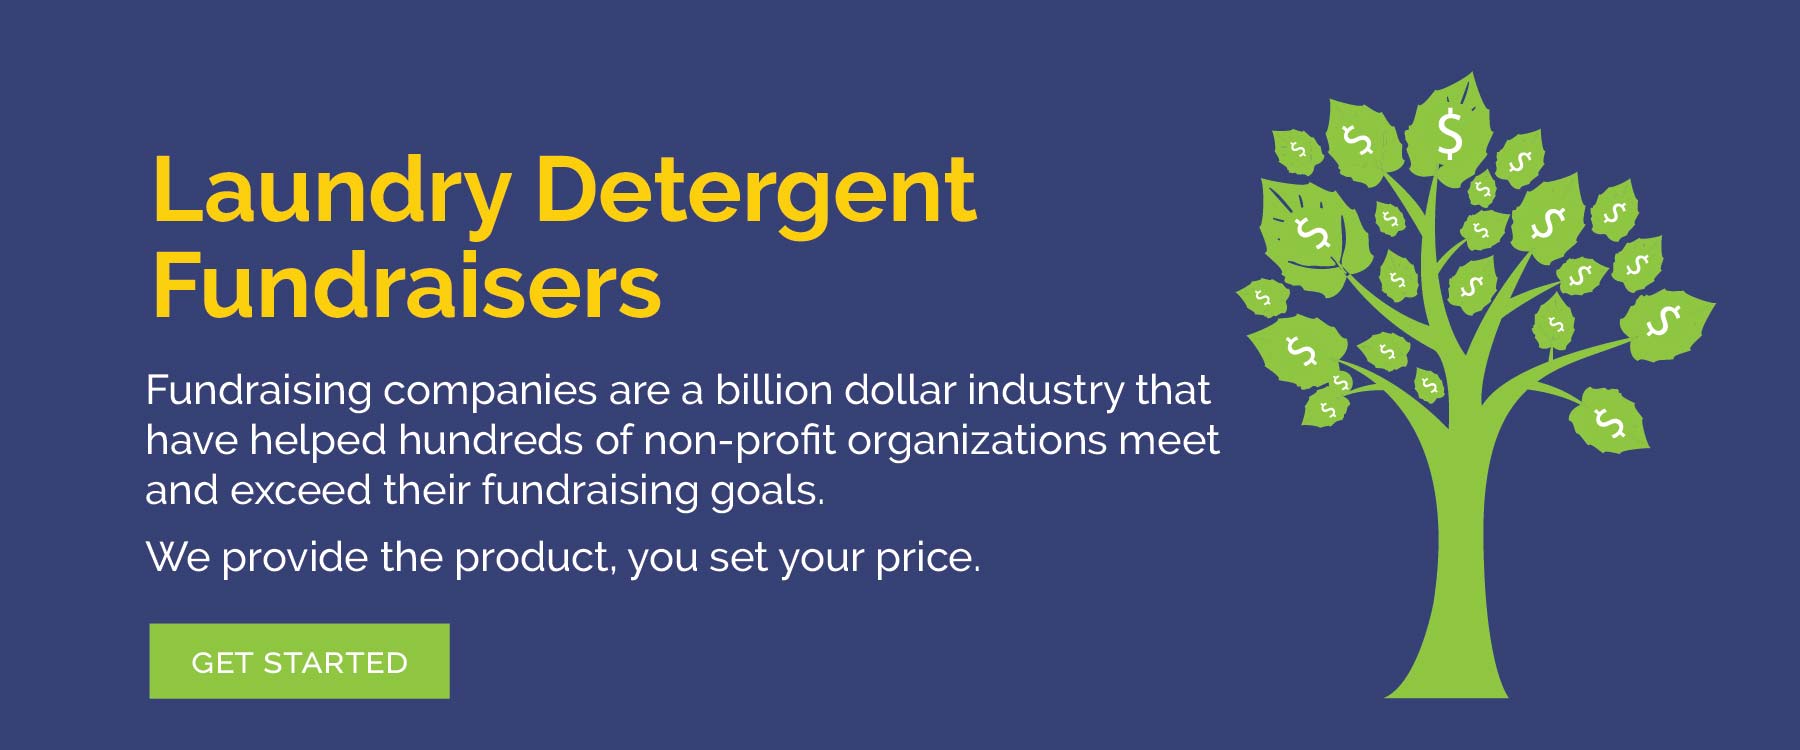 Laundry Detergent Fundraisers